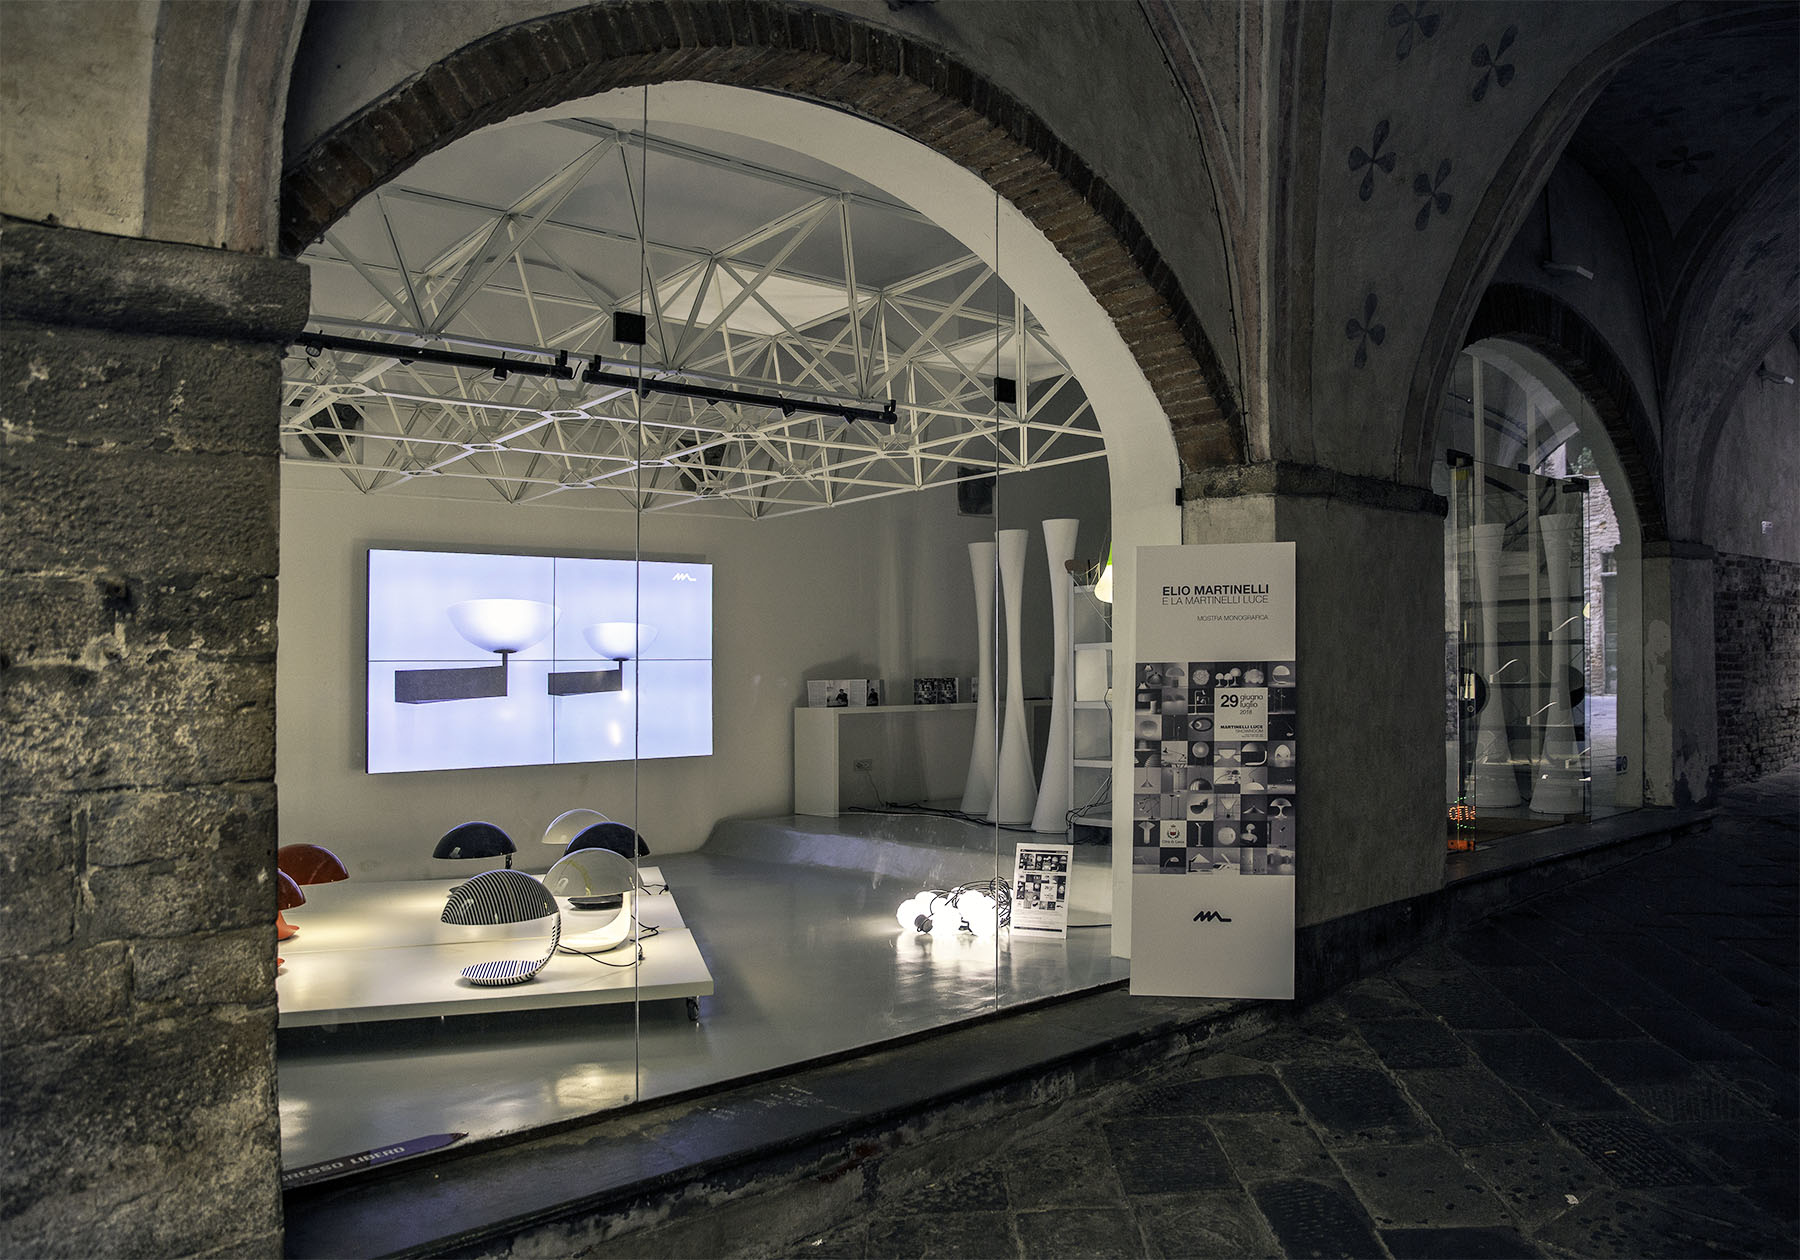 The exhibition dedicated to Elio Martinelli moves from Milan to Lucca